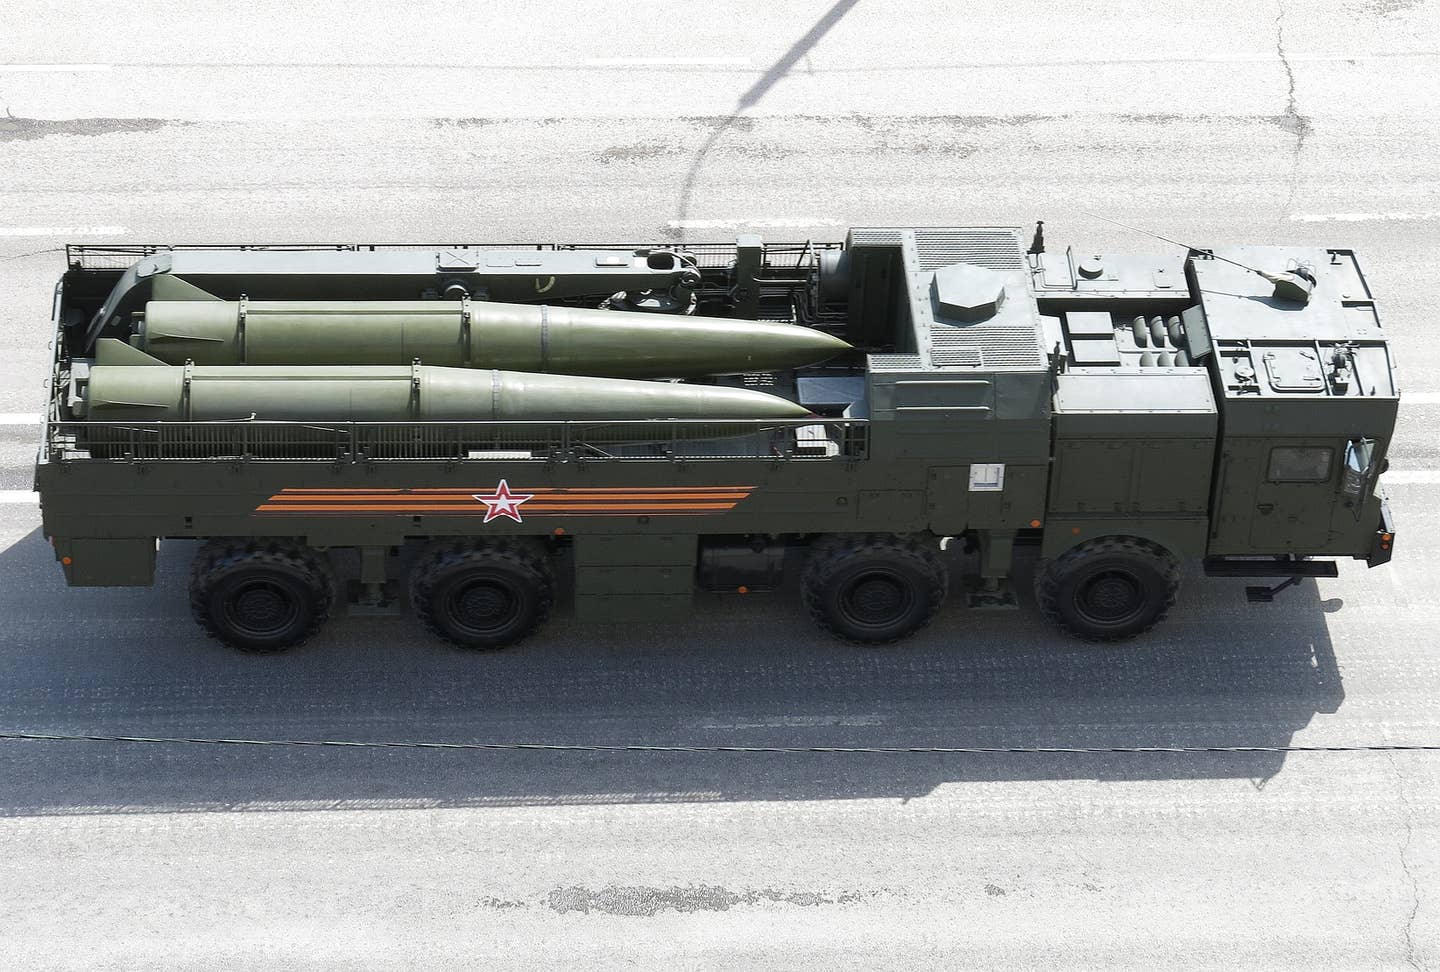 Iskander Transport Loader 9T250, holding two SS-26 ballistic missiles. (Wikimedia Commons)